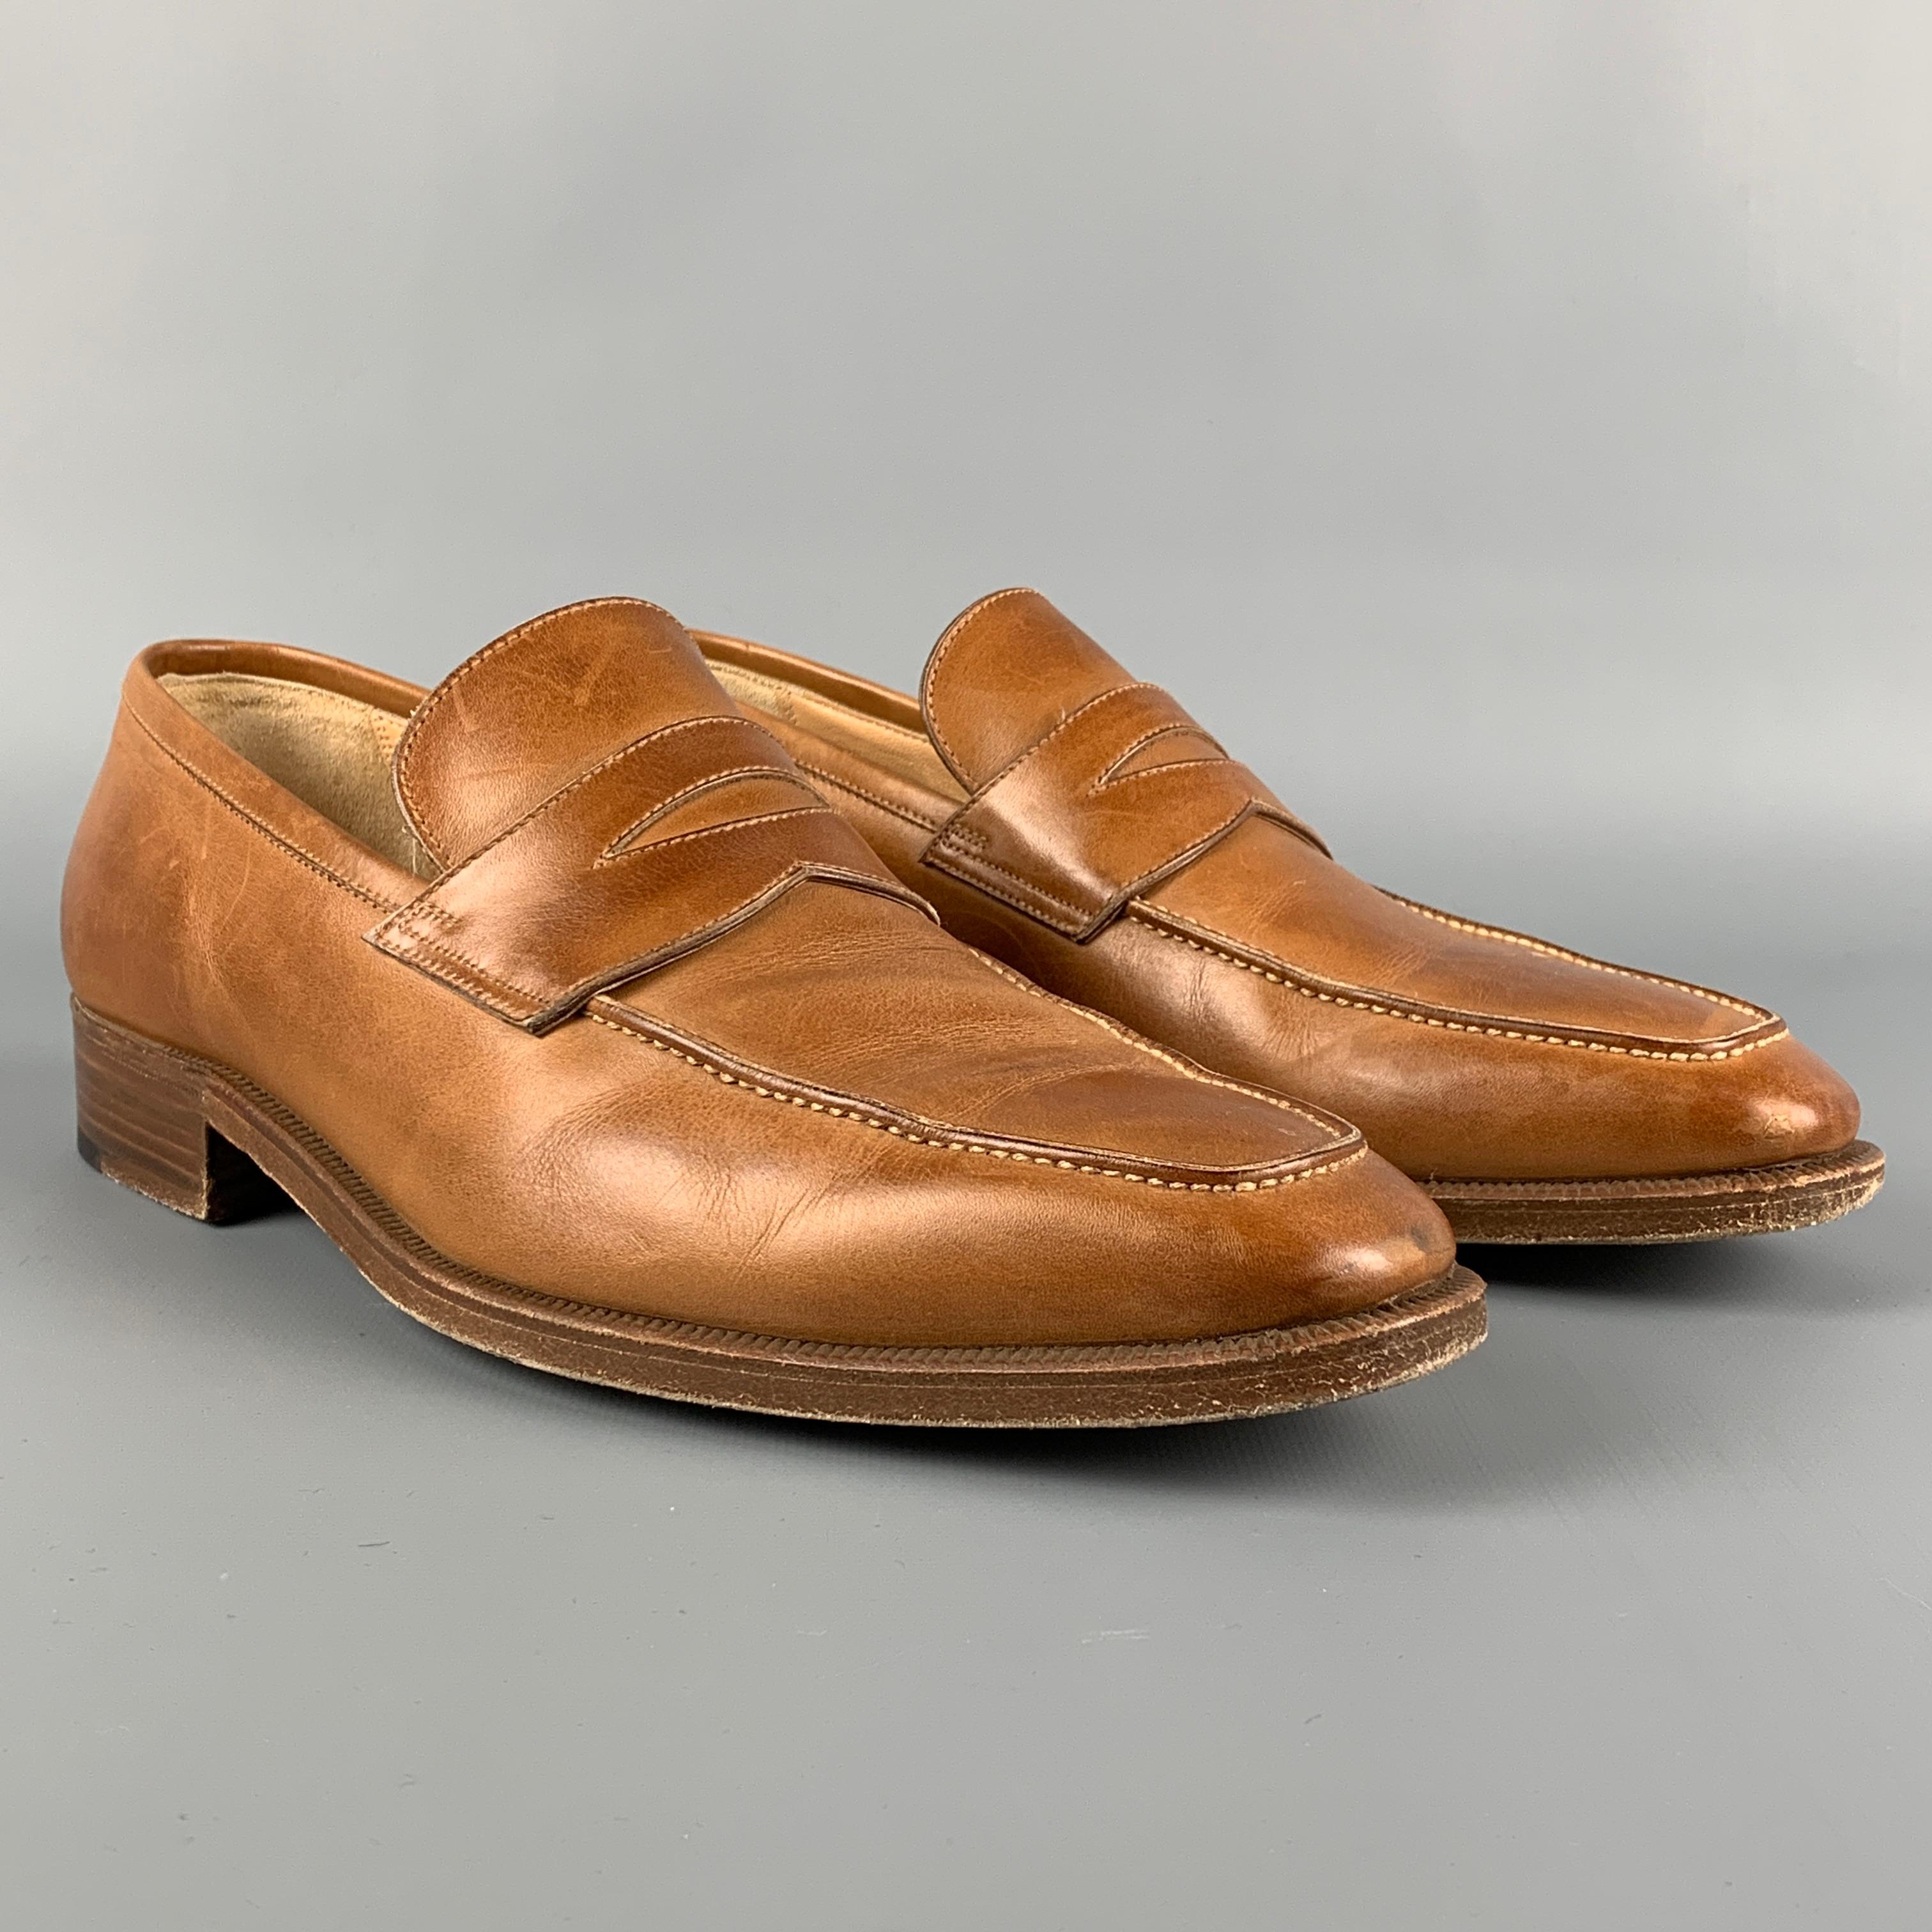 GRAVATI for WILKES BASHFORD loafers comes in a tan leather featuring a penny strap, slip on, and a square toe. Made in Italy. 

Very Good Pre-Owned Condition.
Marked: 16939 8M 655

Outsole: 11.5 in. x 4 in. 